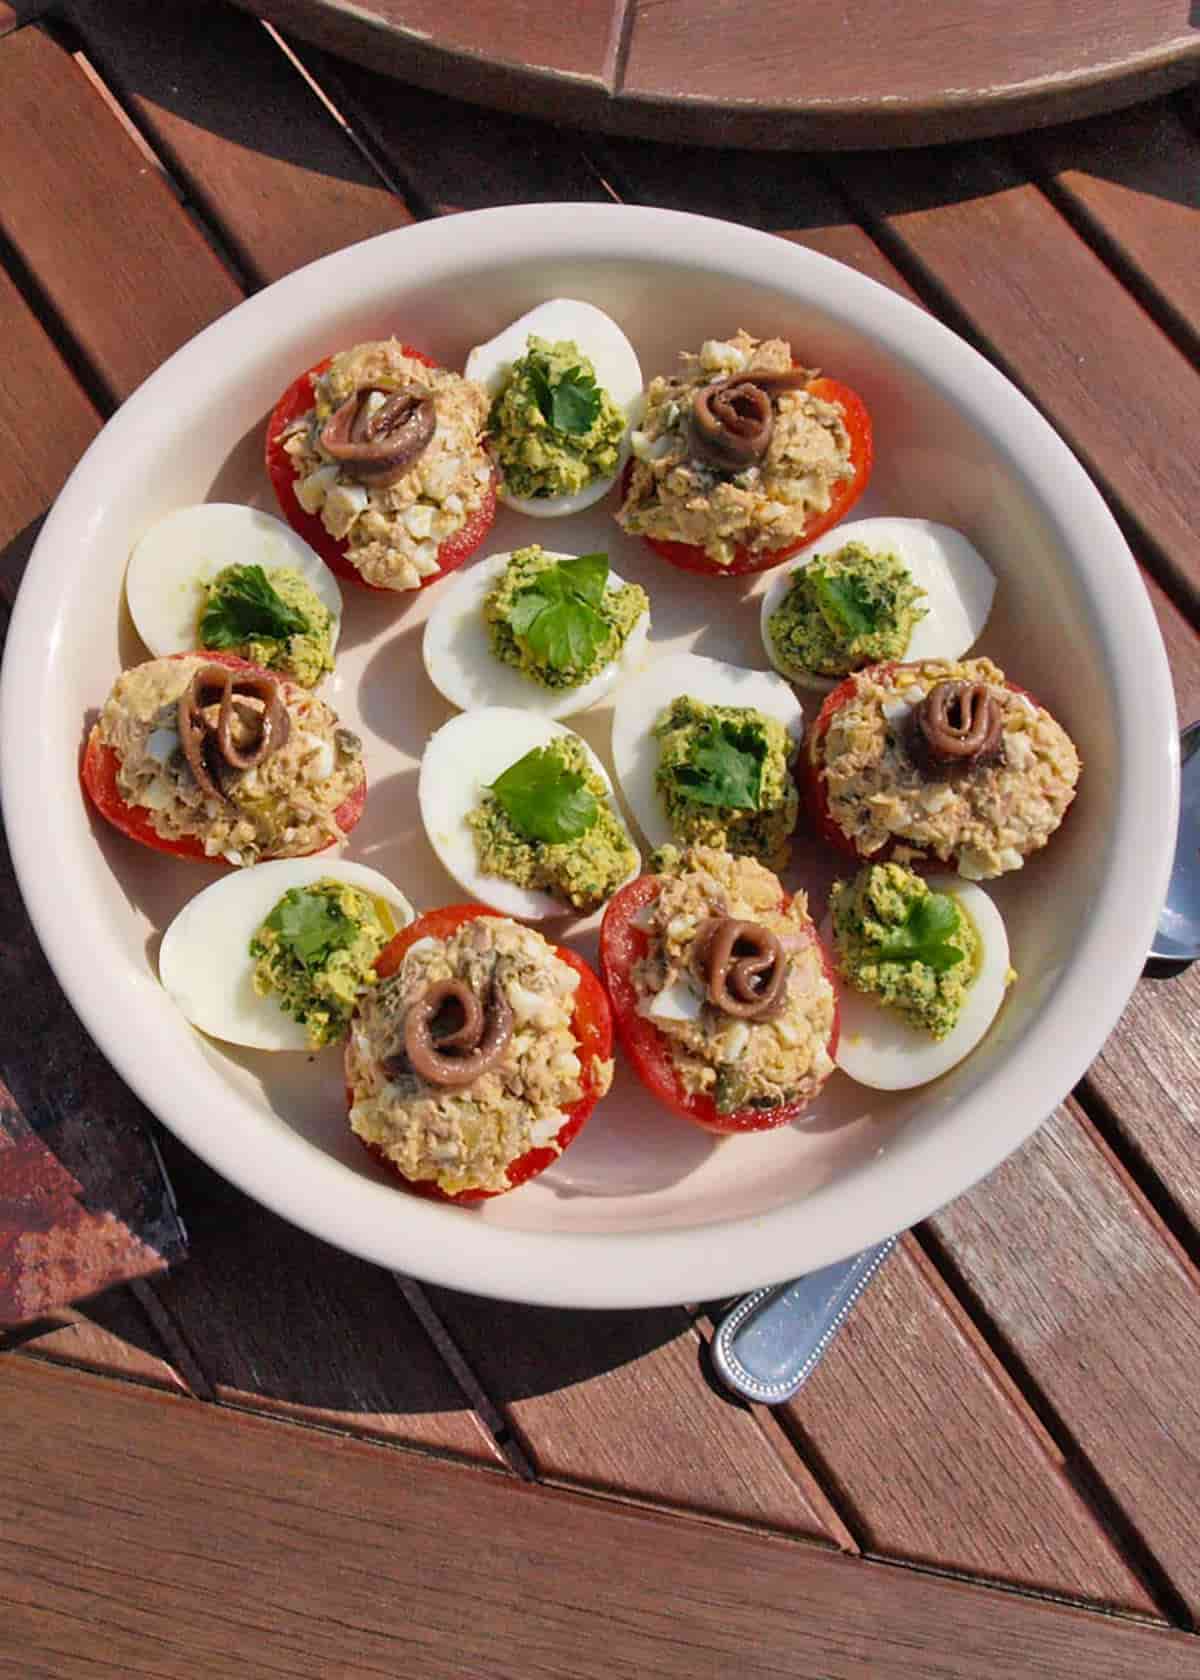 plate of stuffed tomatoes with stuffed eggs